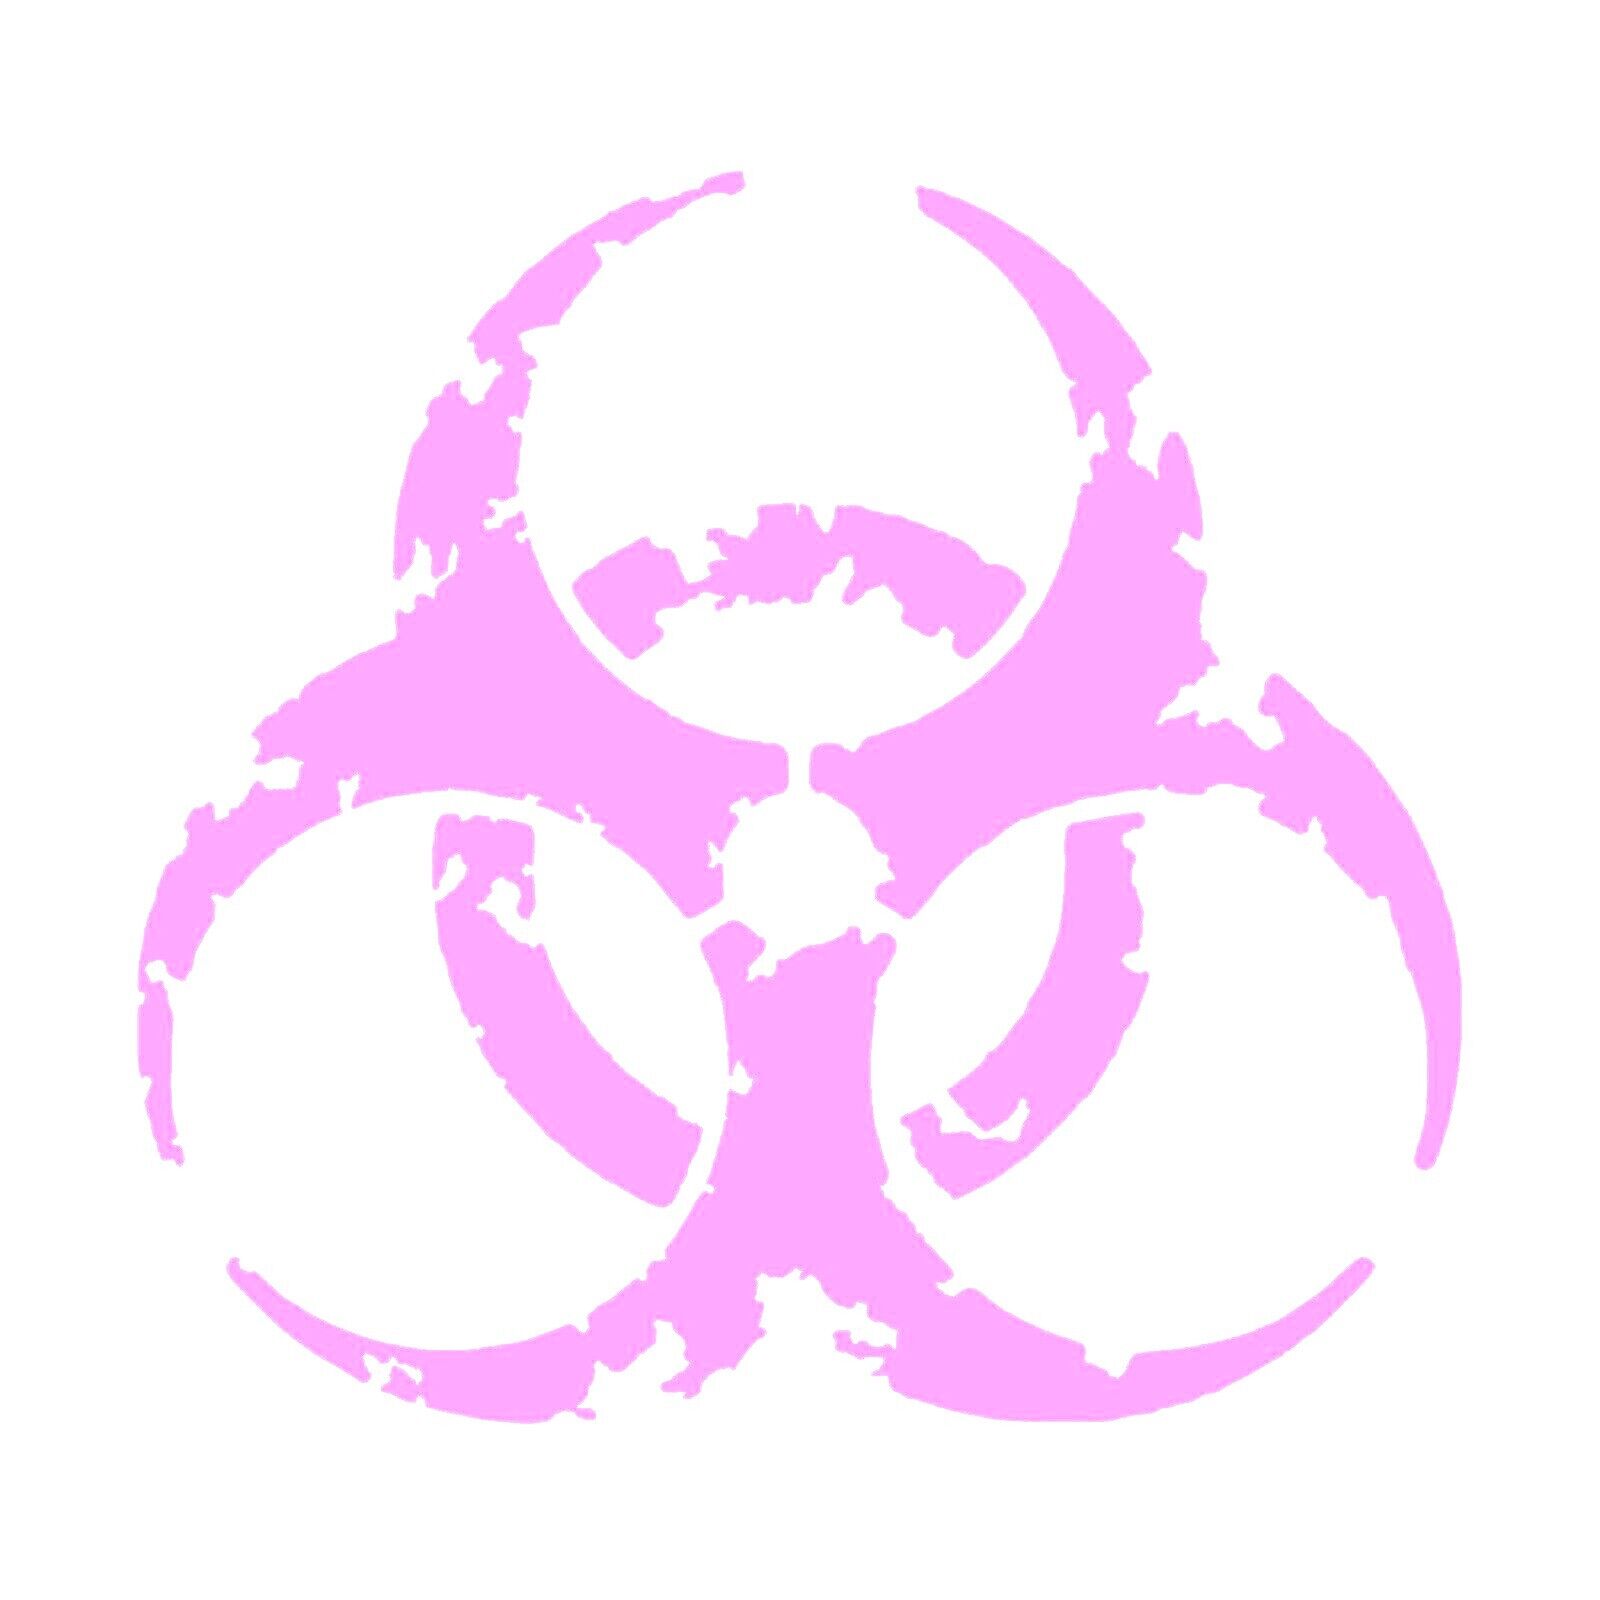 Biohazard Decal - Distressed Biohazard Sticker - Select Color and Size